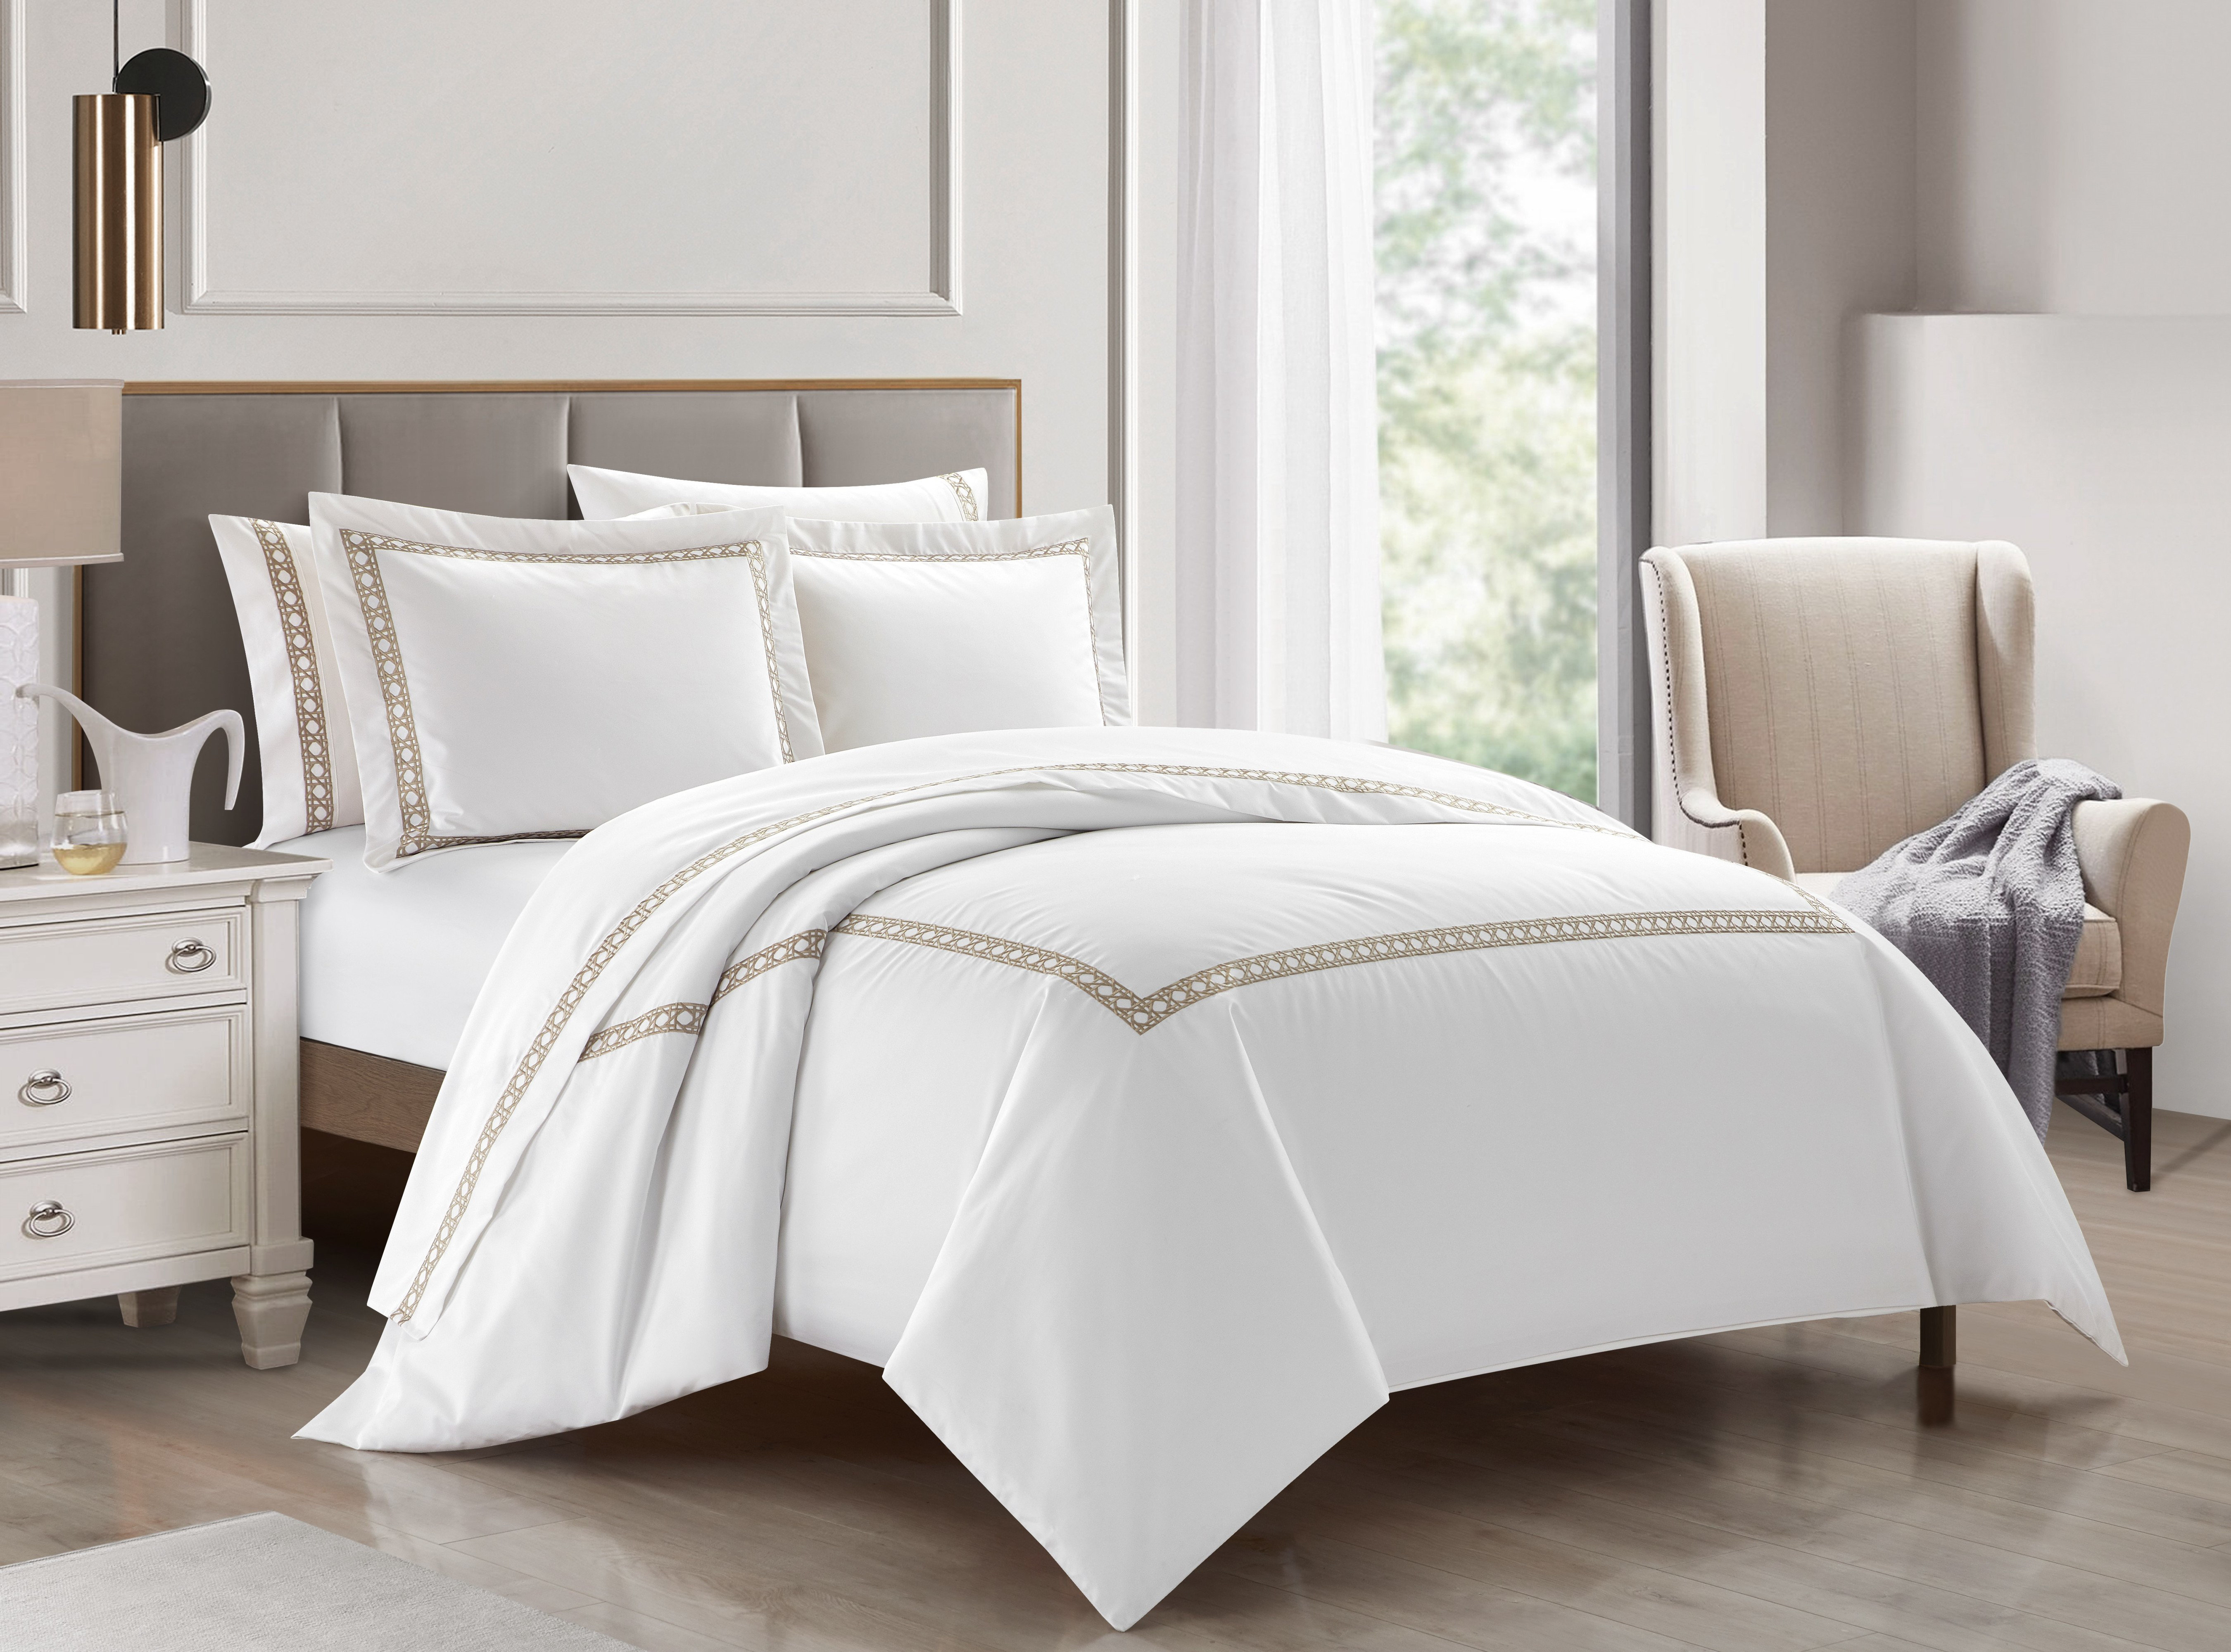 220 Thread Count Pillow Hotel Collection by Cozy Classics - White